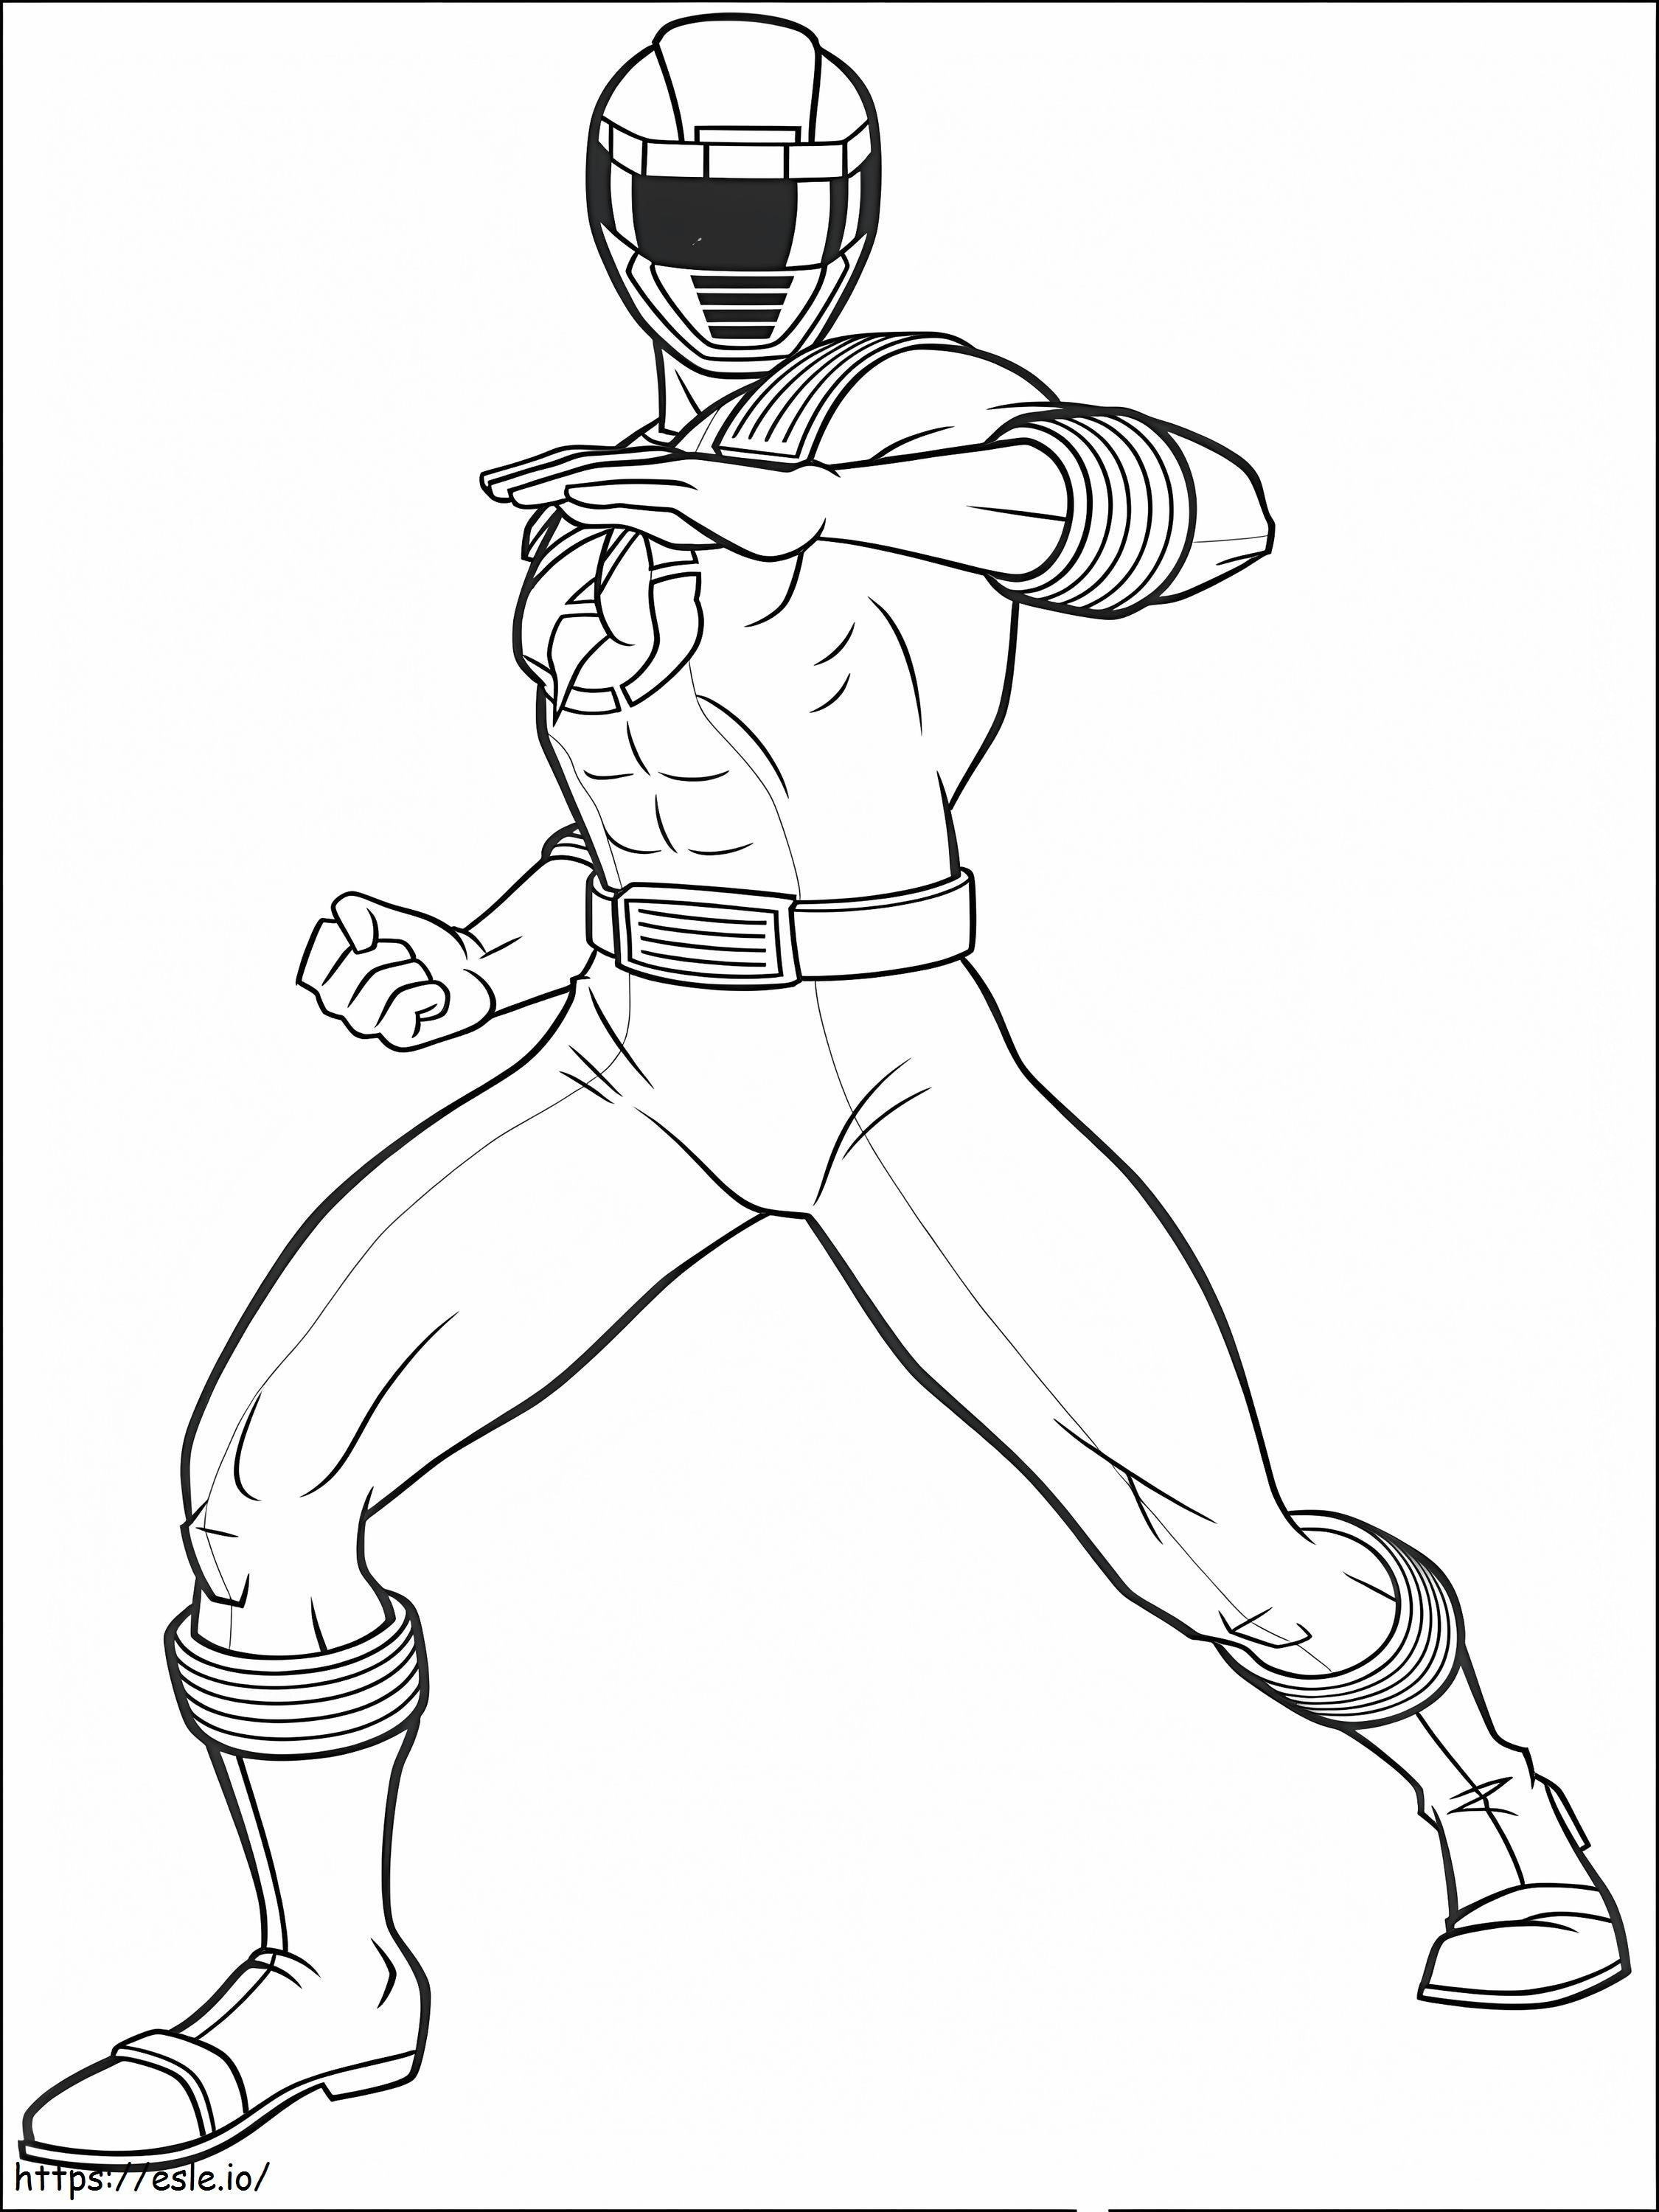 Power Rangers Rouge coloring page